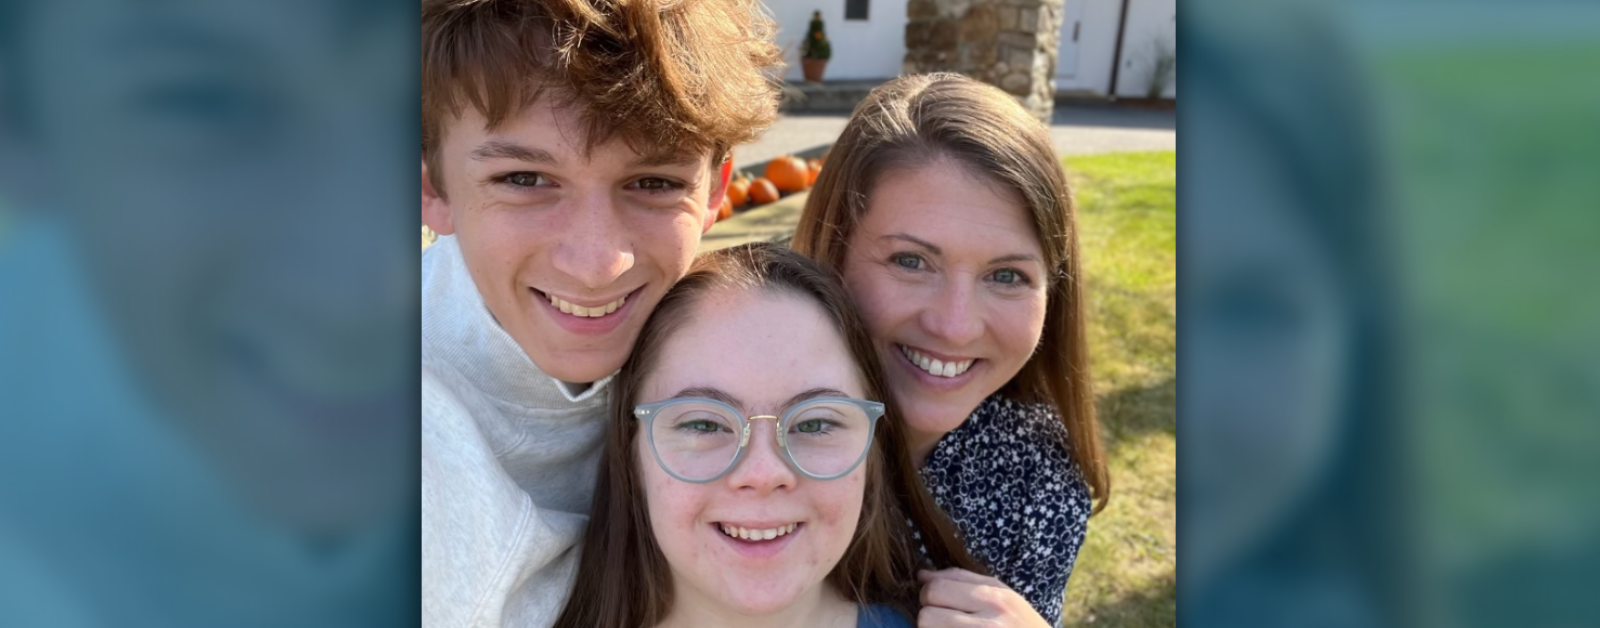 an outdoor photo of William, a teenage boy, Penny, a teenage girl with Down syndrome, and their mom, Amy Julia, leaning in close together and smiling at the camera